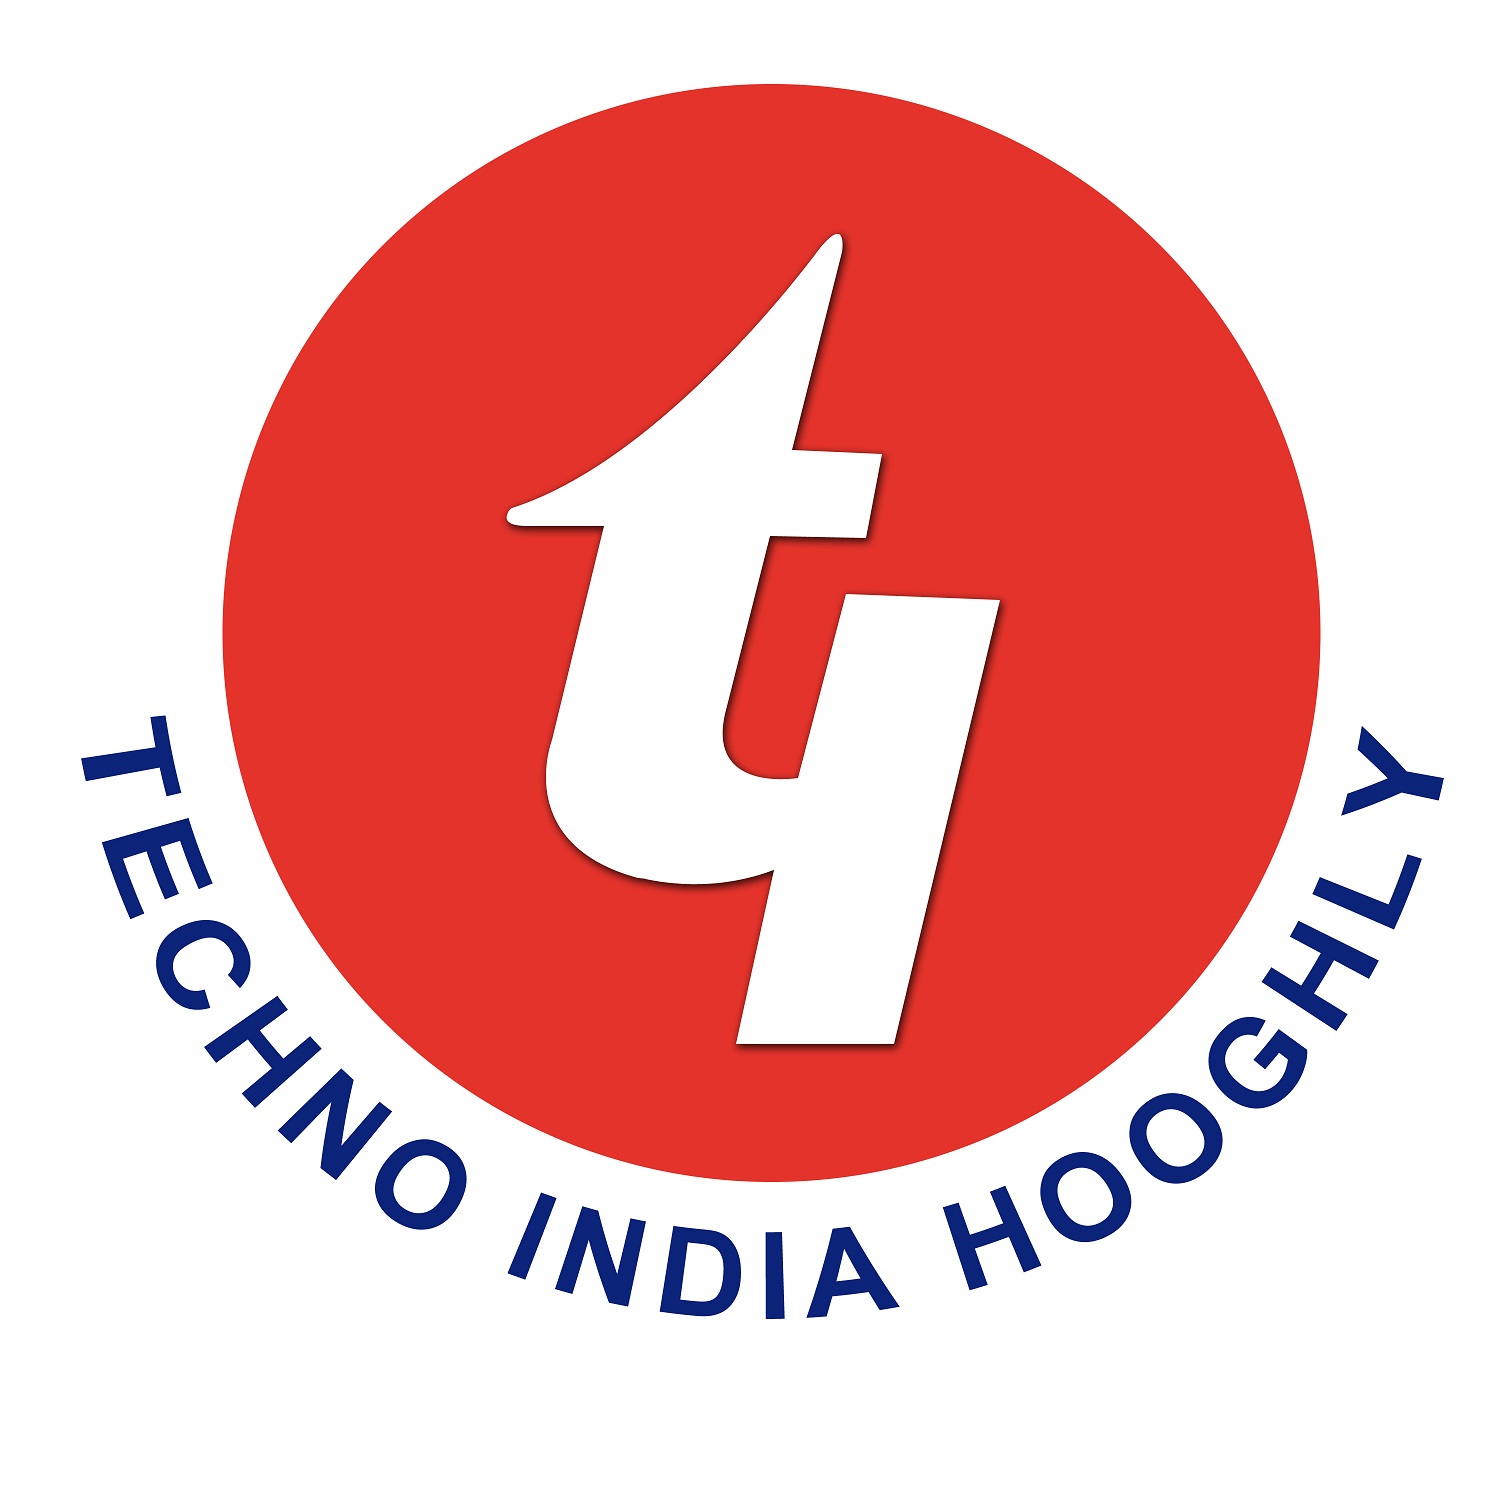 TECHNO INDIA HOOGHLY CAMPUS